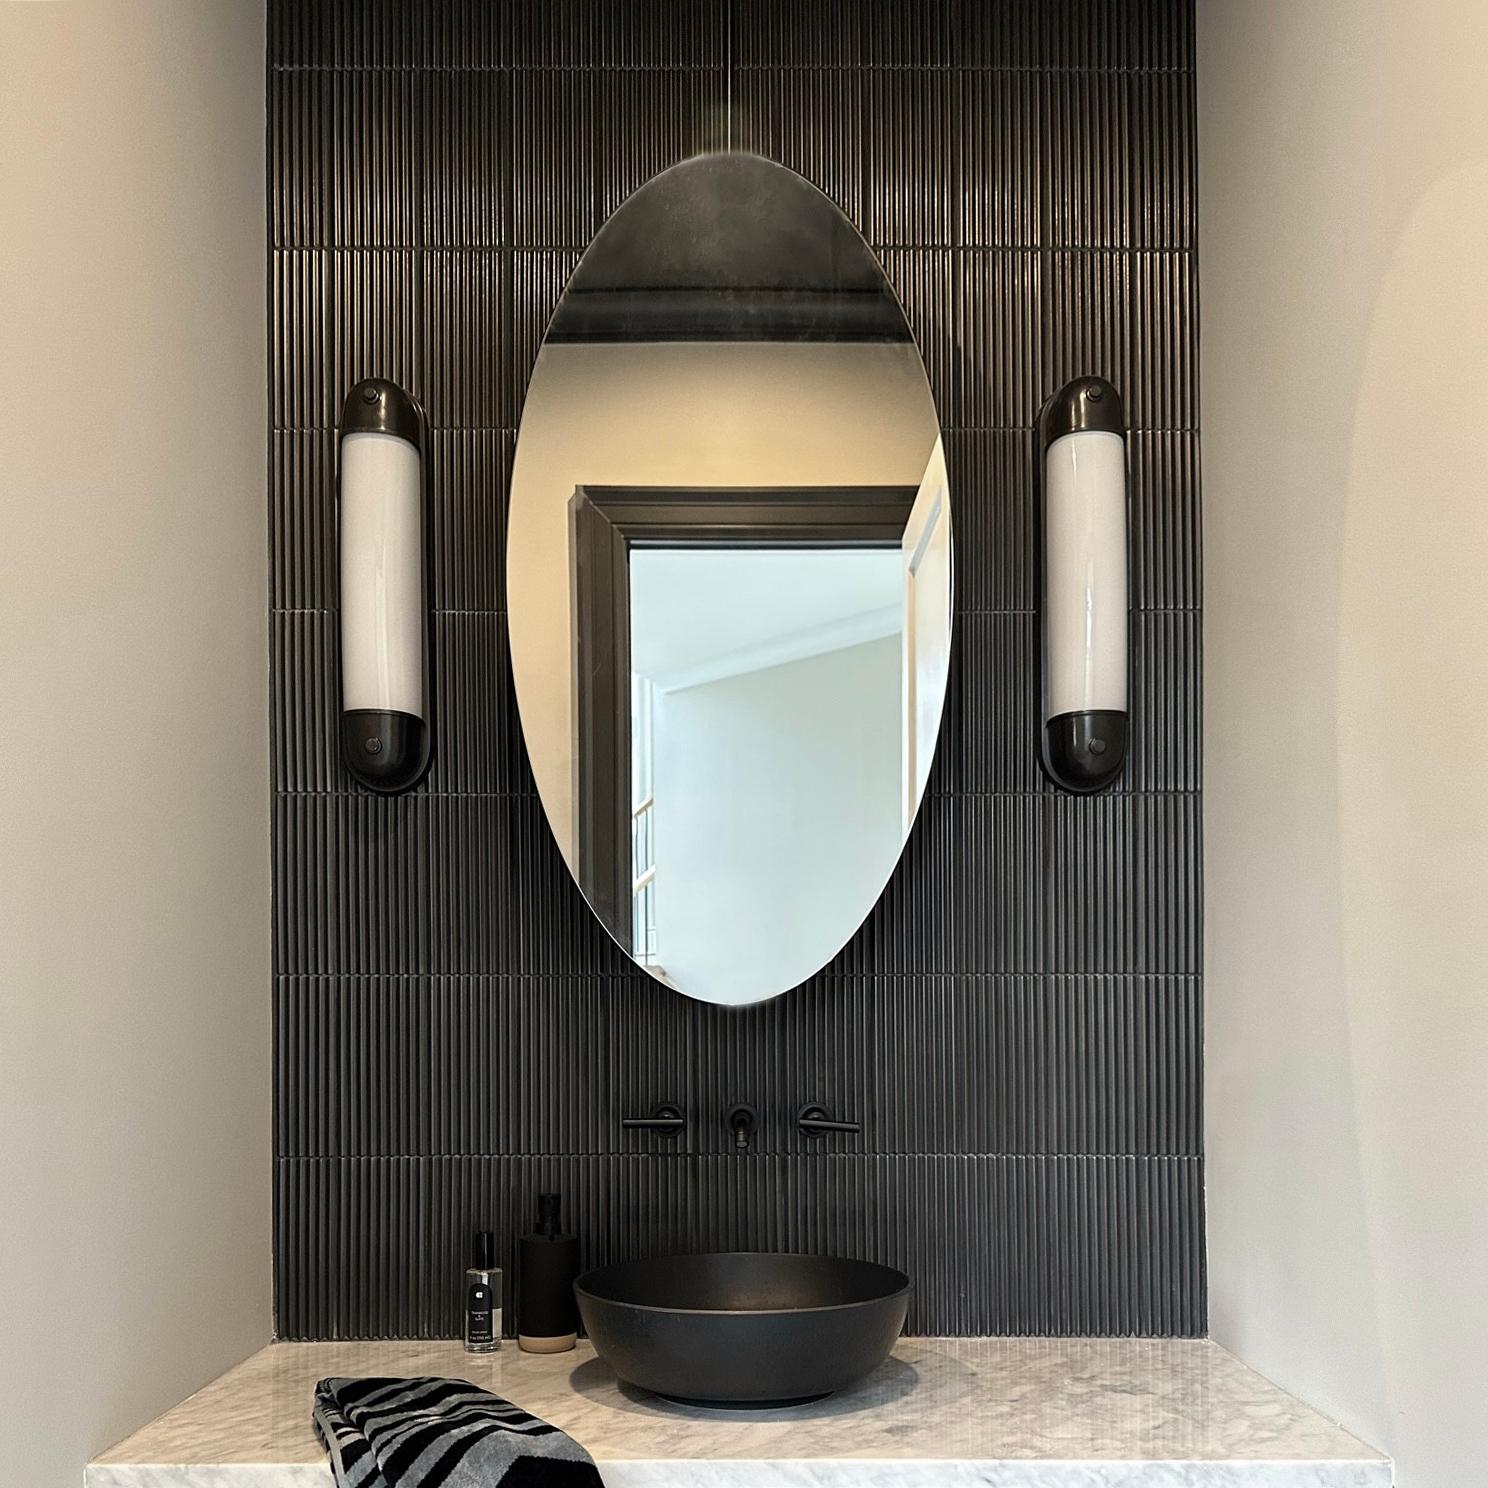 Art Deco ceiling suspended oval shaped mirror with an elegant matte black frame.

Measures: 500mm (20